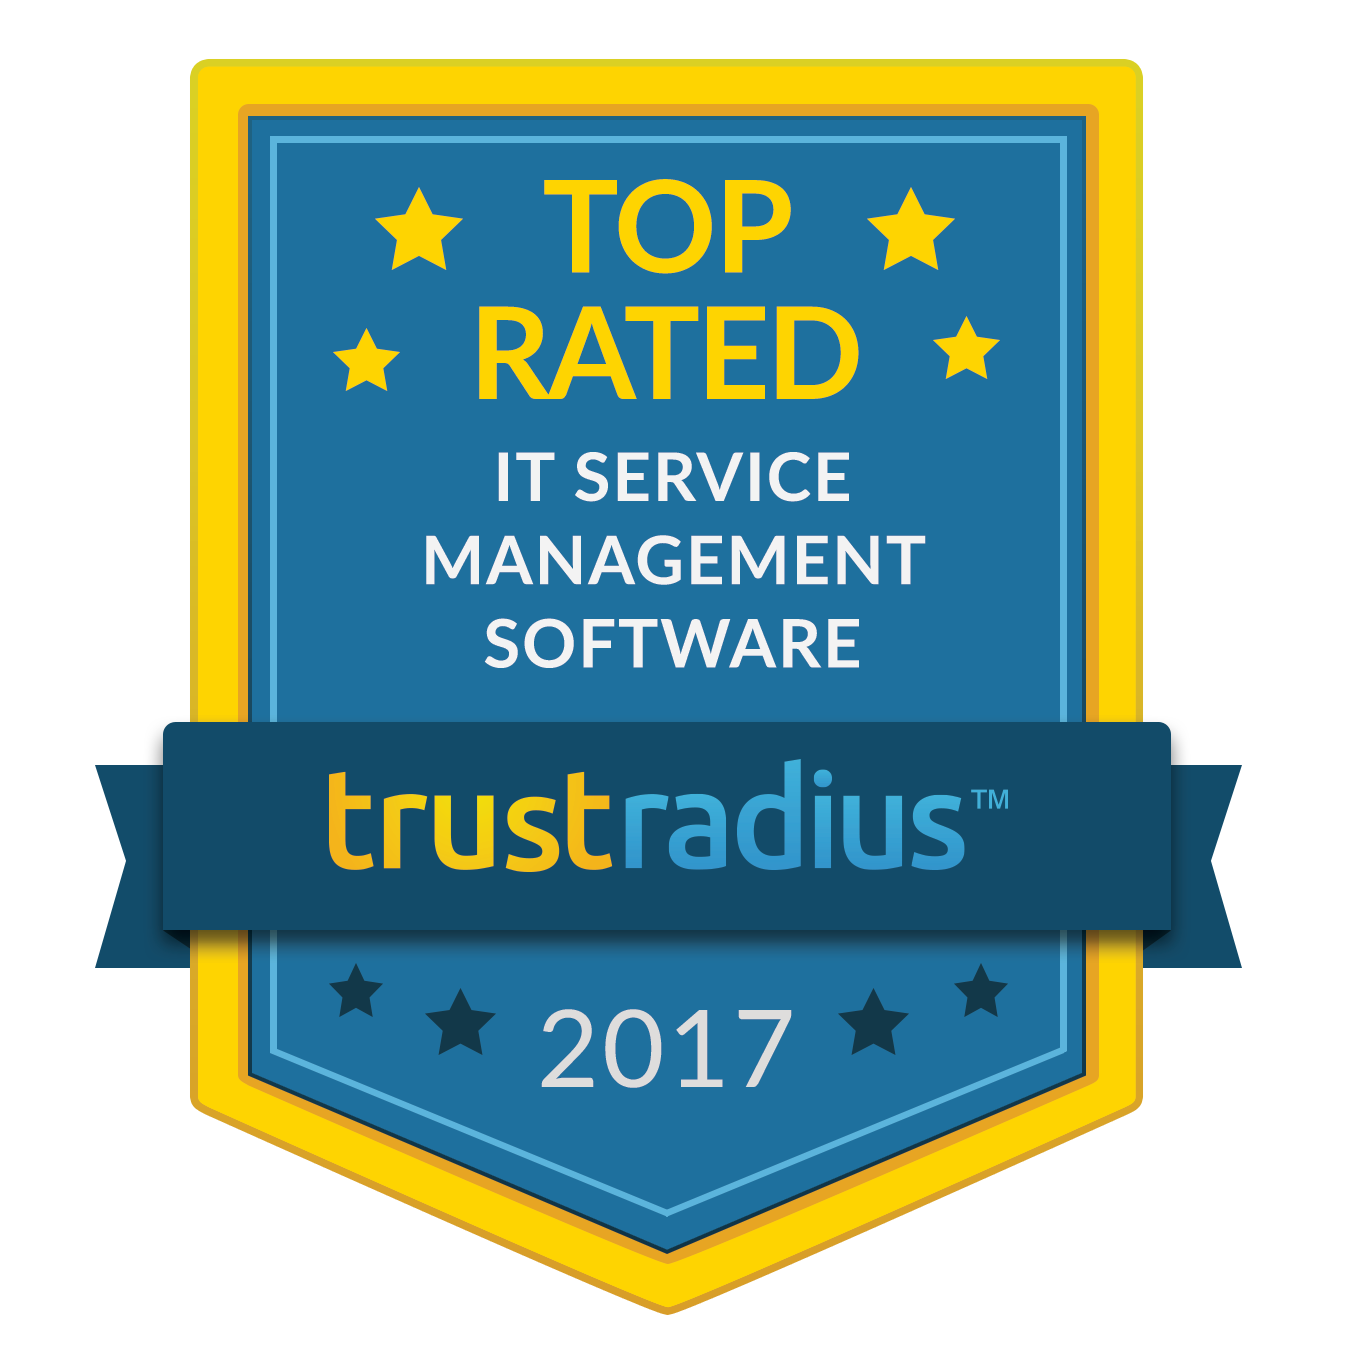 Top Rated IT Service Management Software on TrustRadius